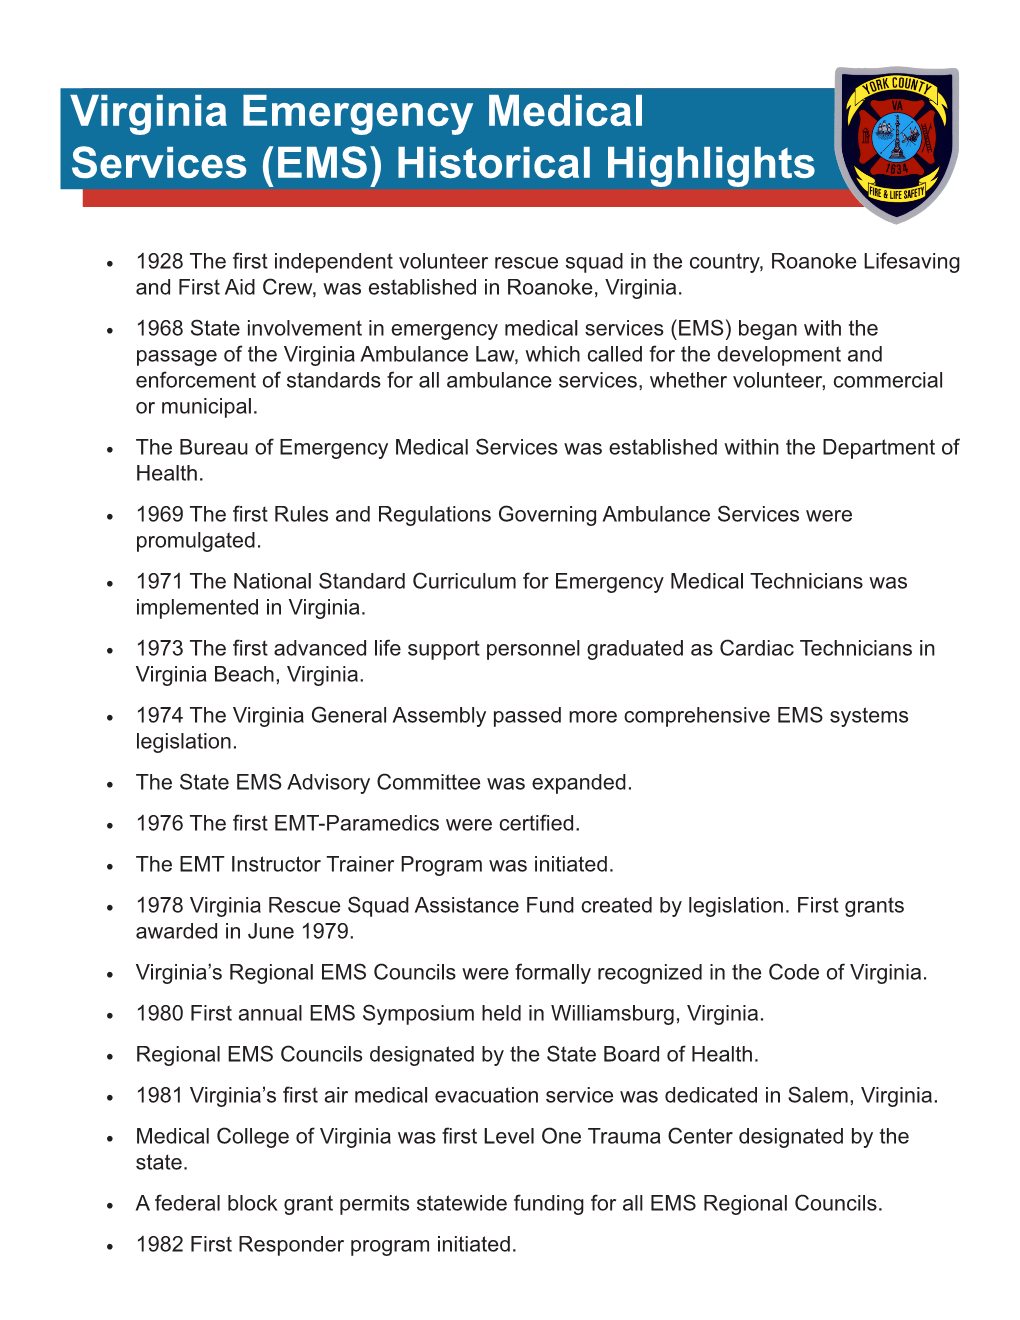 Virginia Emergency Medical Services Historical Highlights